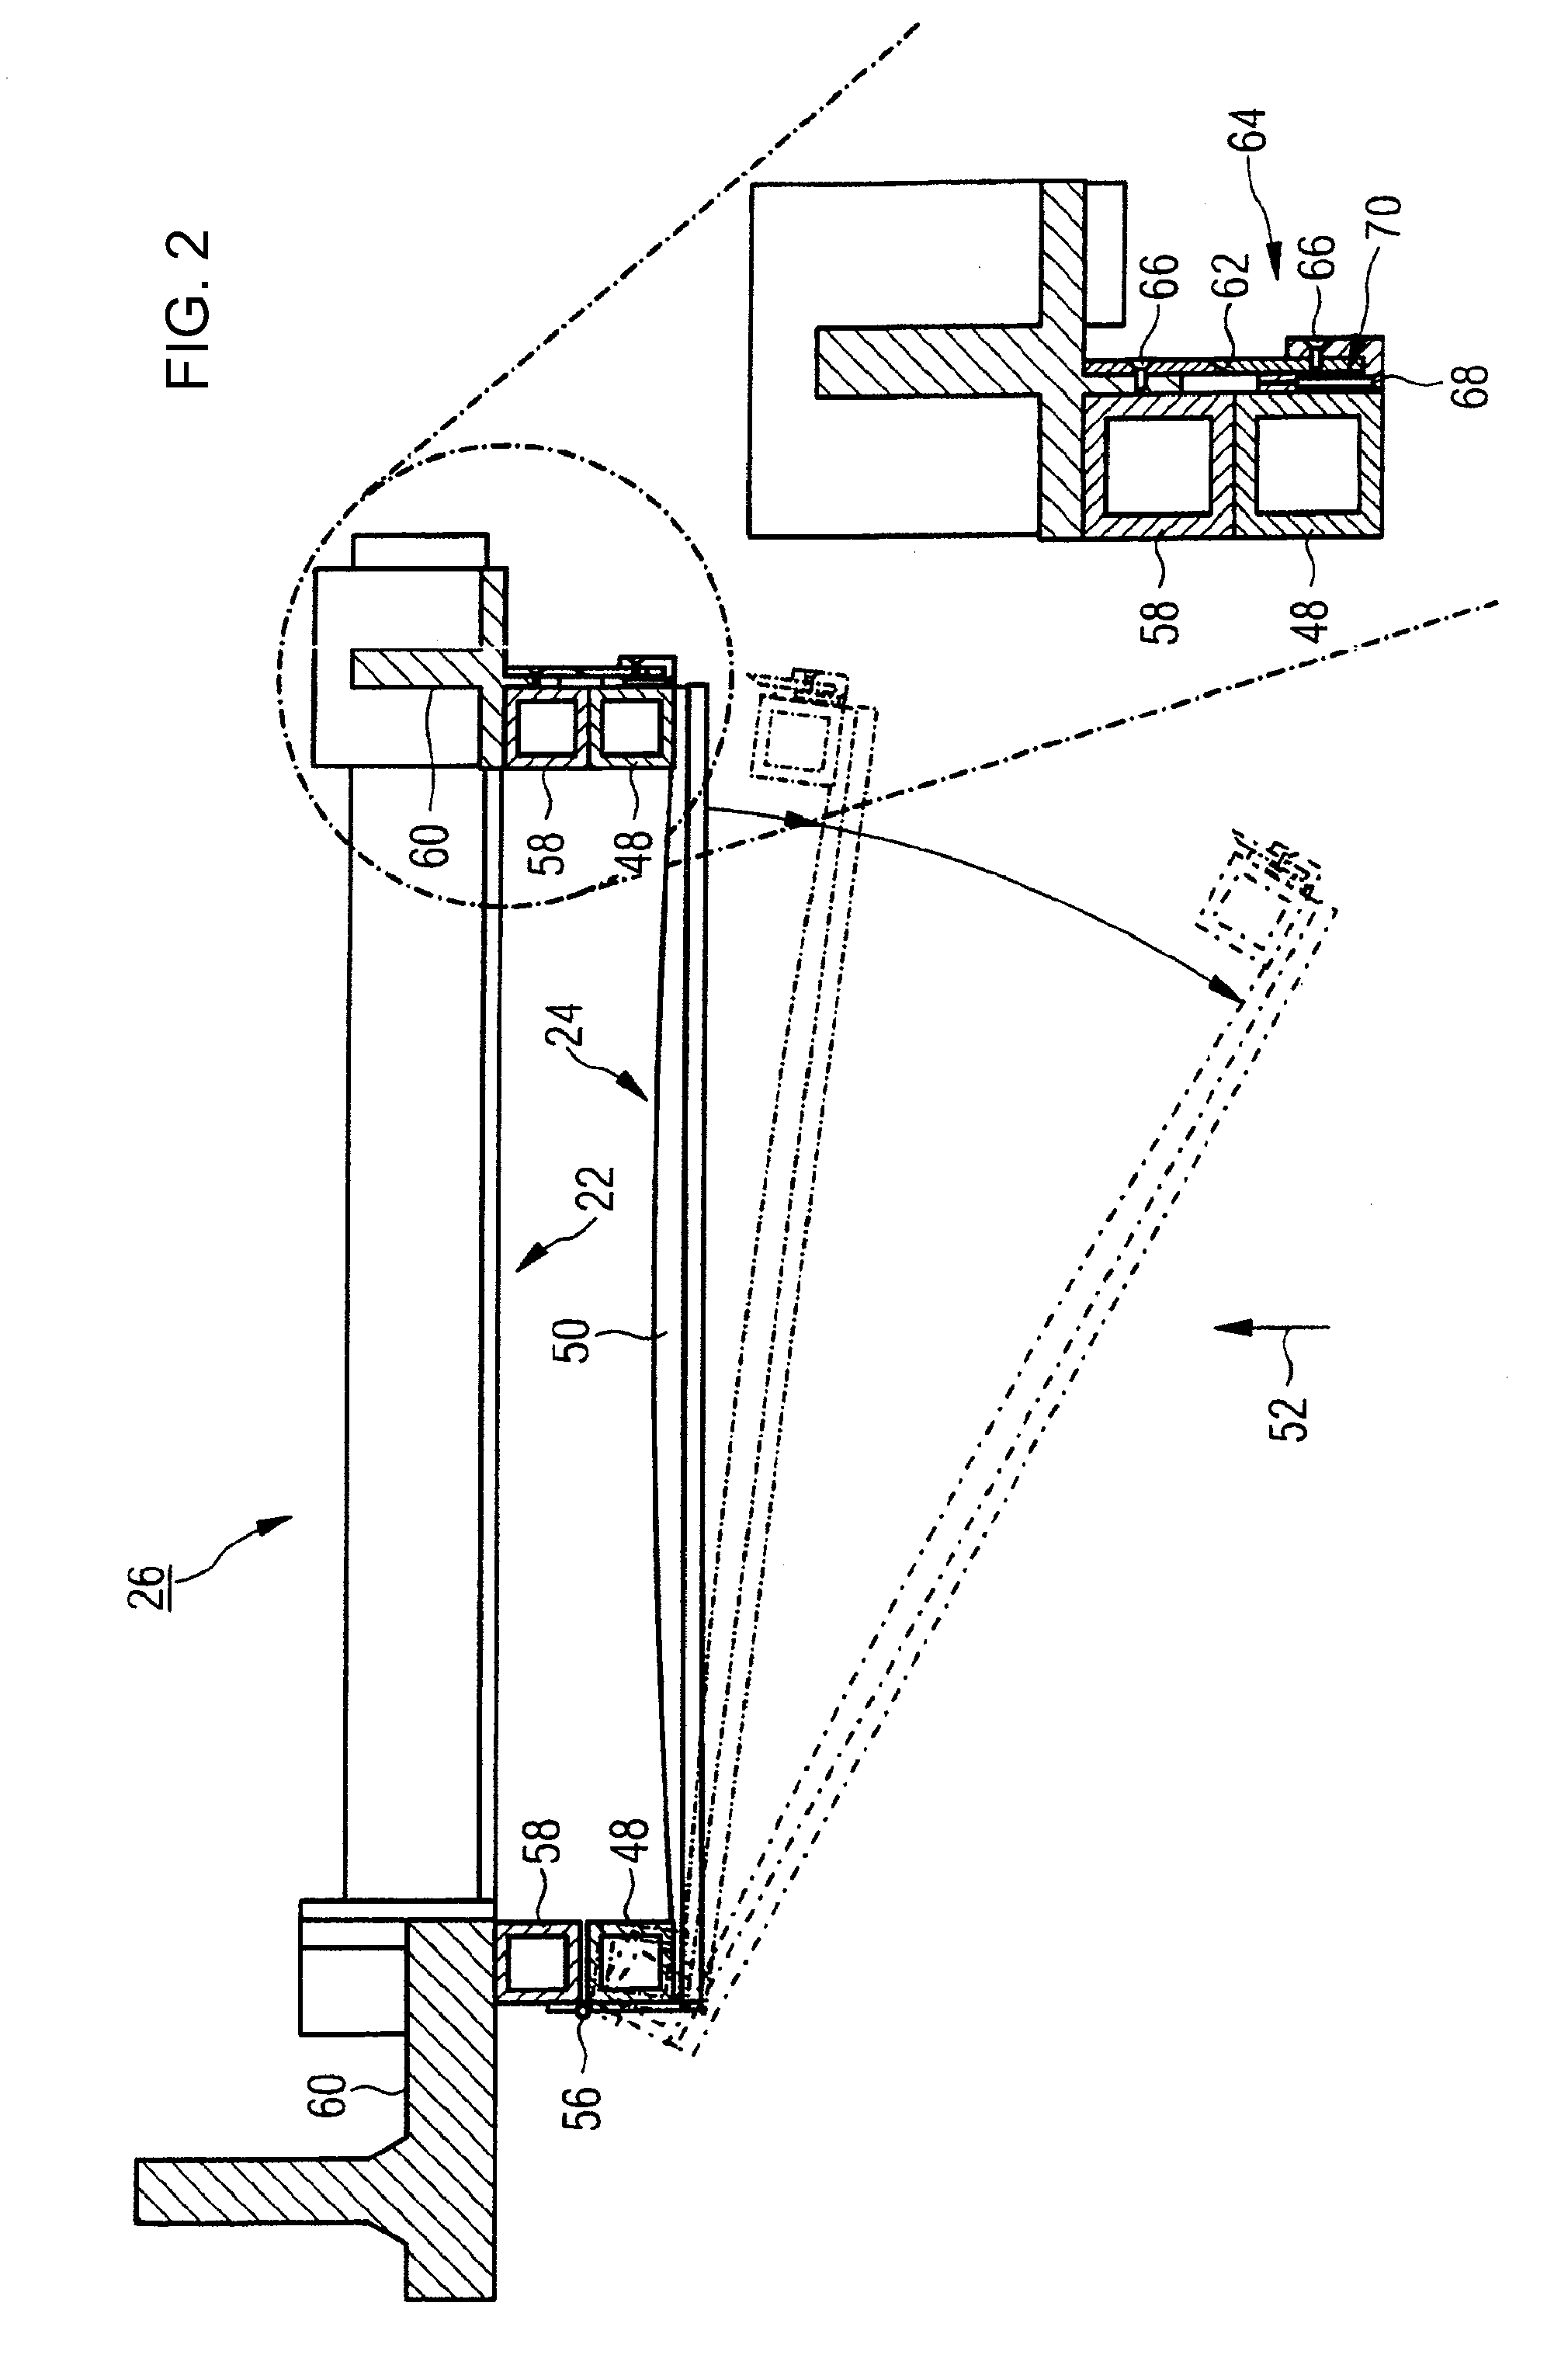 Nuclear engineering plant and closure apparatus for its containment